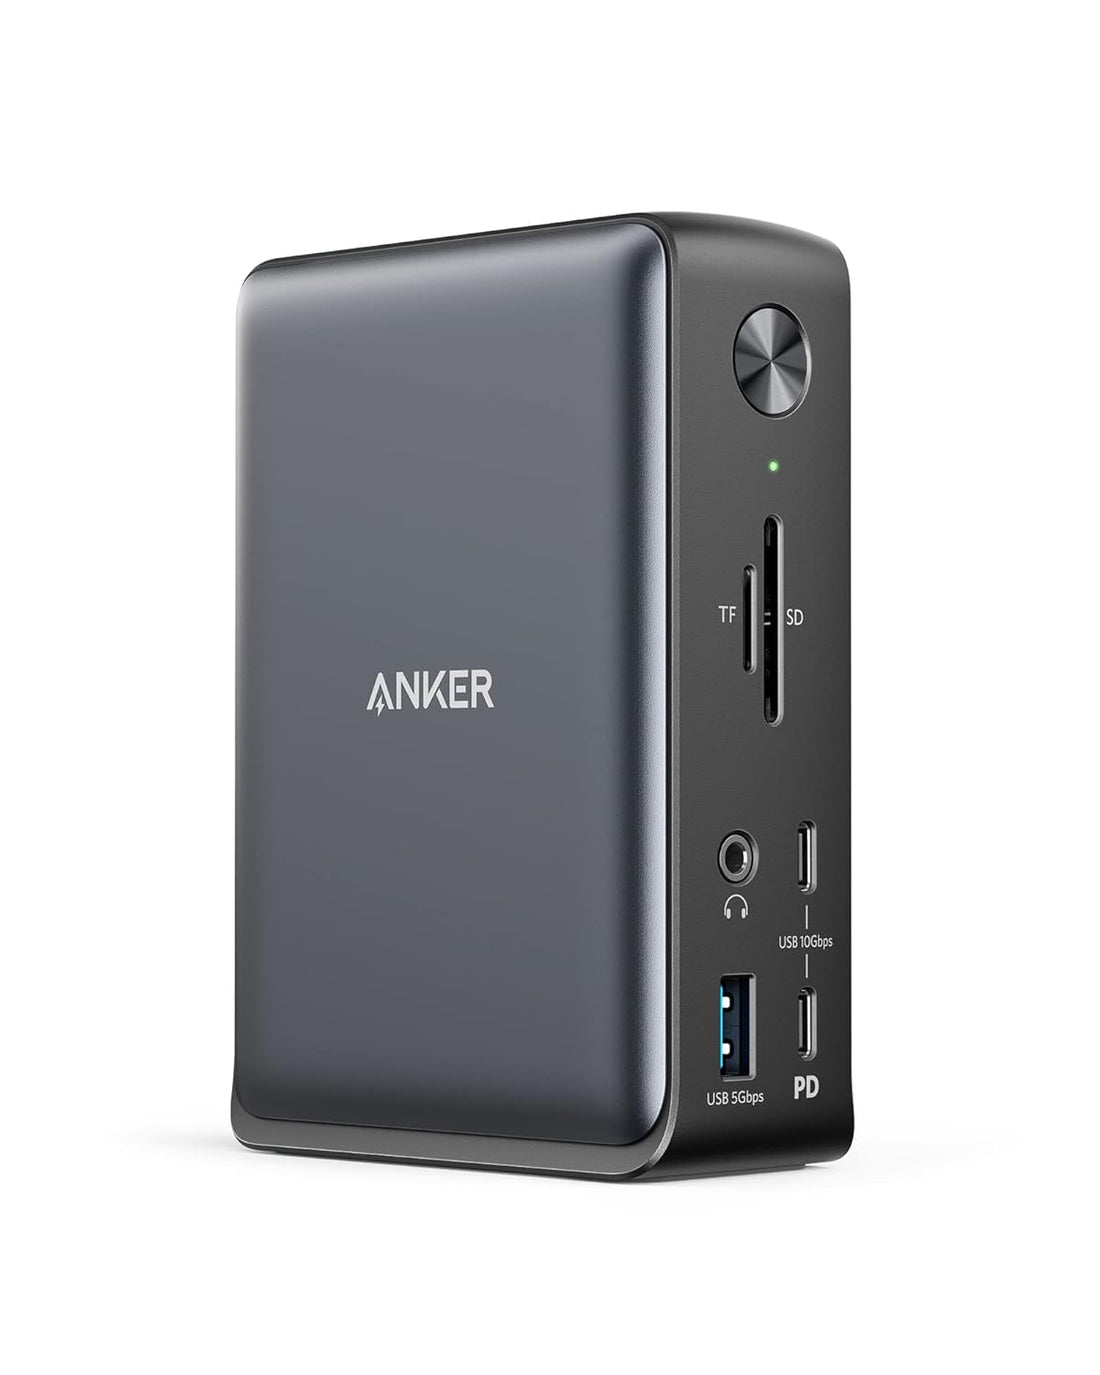 Anker Docking Station, PowerExpand 13-in-1 USB-C Dock for USB-C Laptops, 85W Charging for Laptop, 18W Charging for Phone, 4K HDMI, 1Gbps Ethernet, Audio, USB-A Gen 1, USB-C Gen 2, SD 3.0